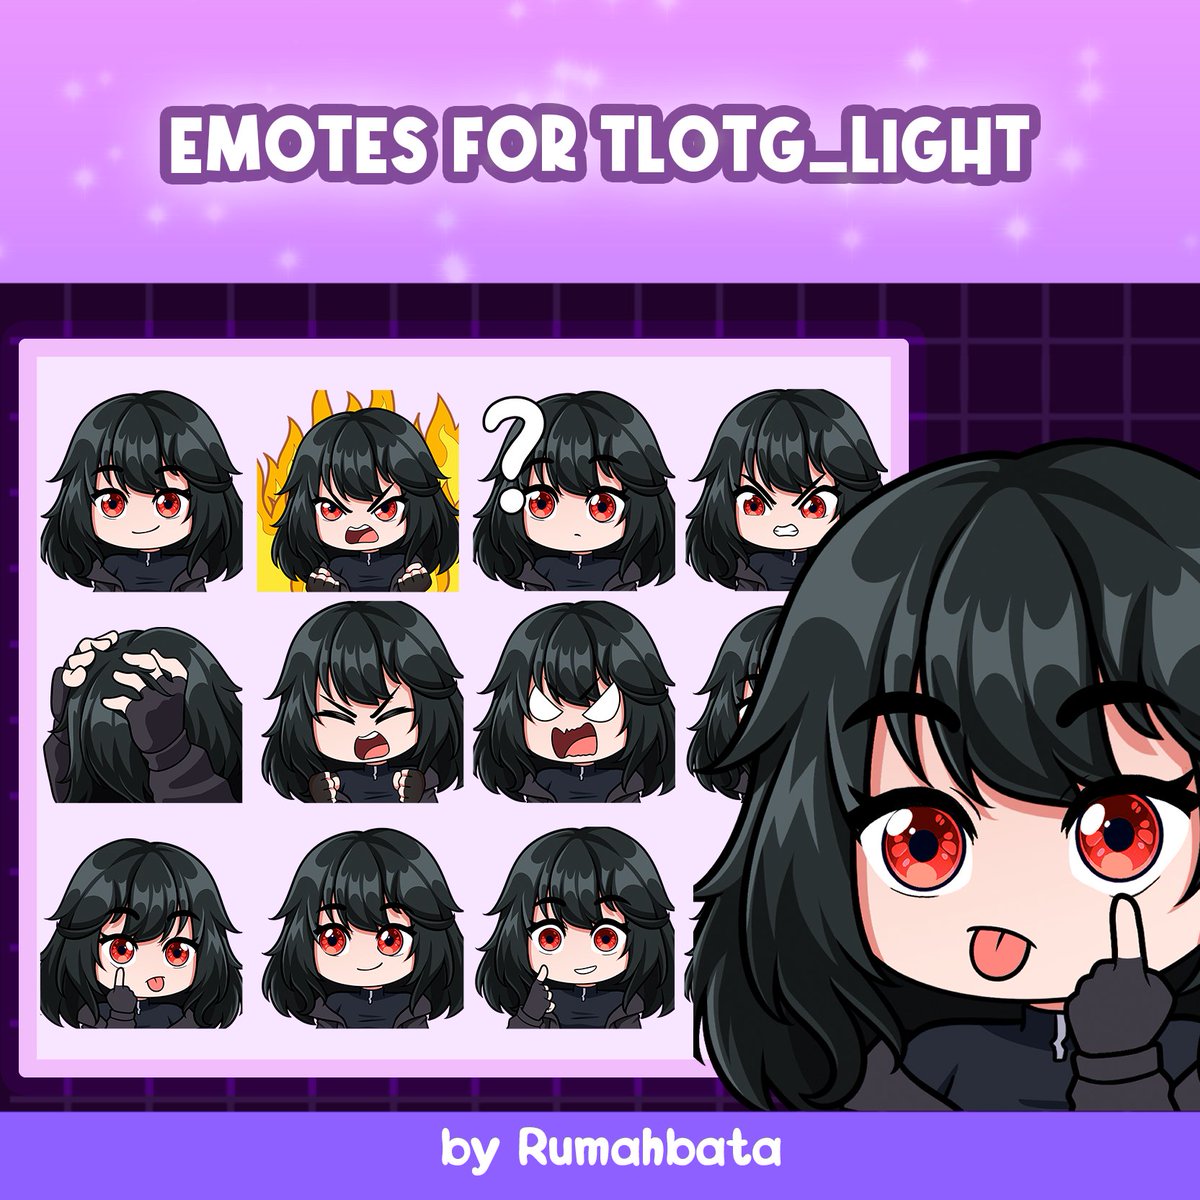 Emotes for my loyal customer!🥰
Txs bro! #TwitchStreamers #Twitch #TwitchTVGaming #designer #GraphicDesigner #GFX #GFXDesigner #twitchtv #emotes #twitch #twitchemotes #chibi #chibiemotes #streamer #twitchatreamer #twitchemotes #twitchoverlays #badges #twitchtv